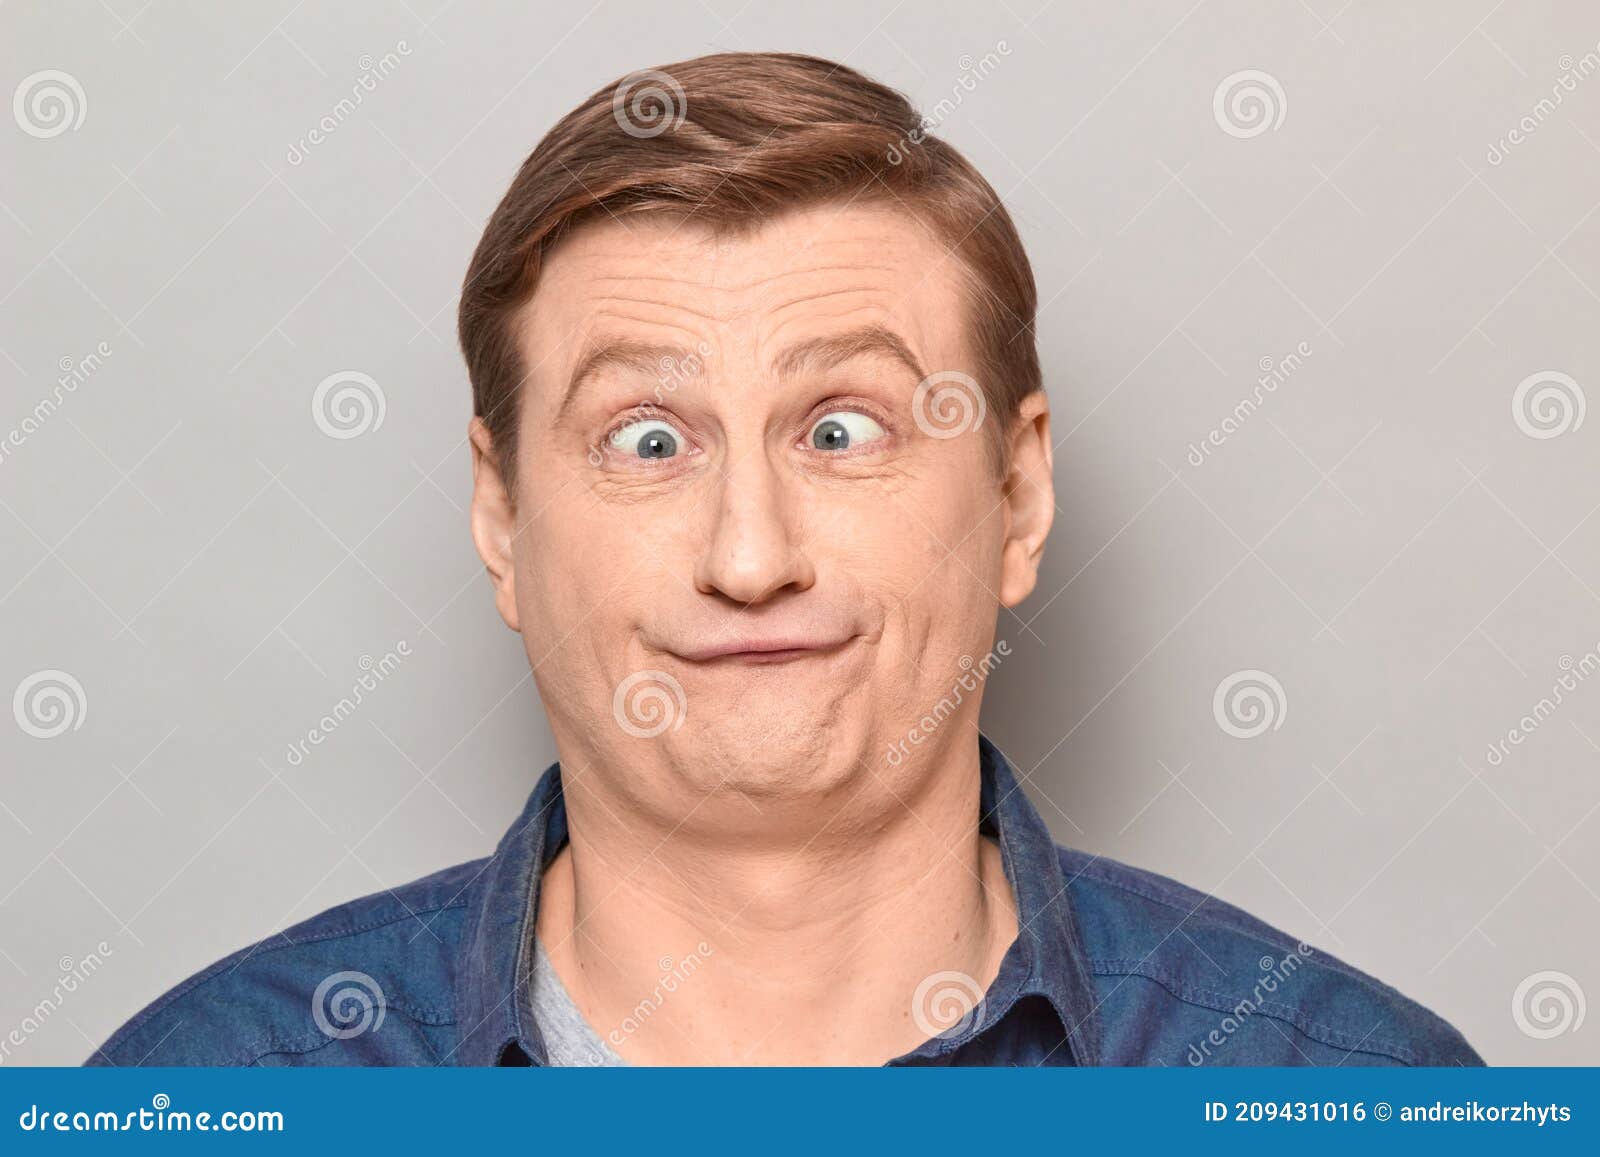 Portrait of Funny Confused Man with with Crossed Eyes Stock Photo - Image  of expression, casual: 209431016